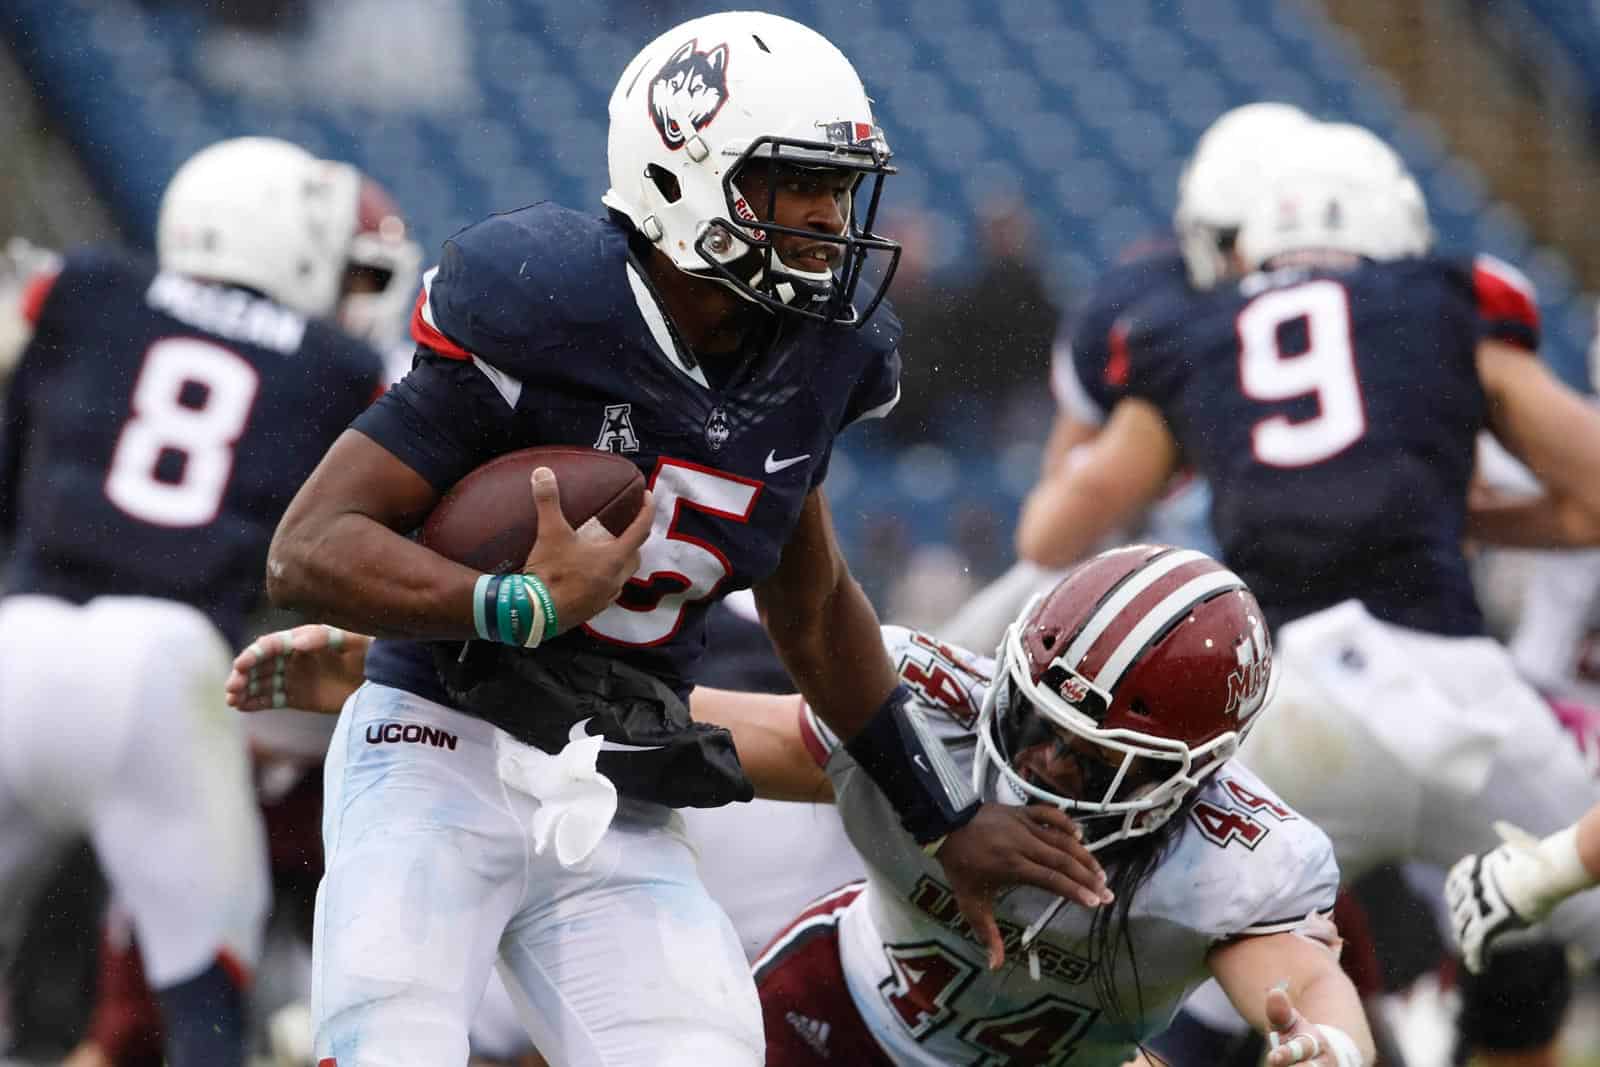 UConn adds Central Connecticut, Lafayette to future football schedules